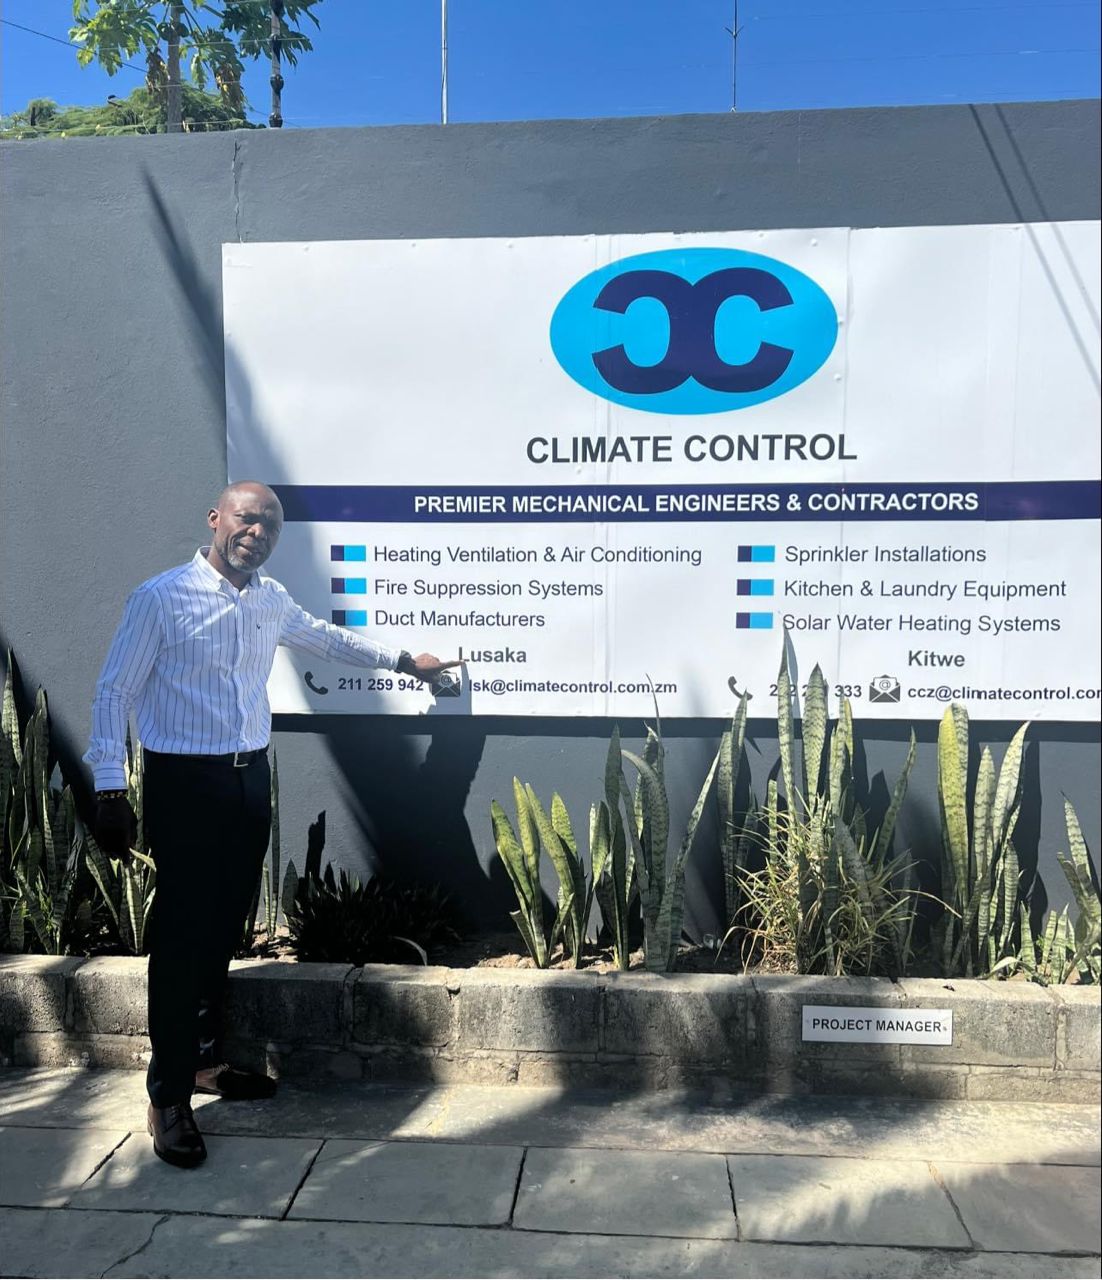 CLIMATE Control Zambia has generously donated heating, ventilation, and air conditioning equipment valued at K250,000 to the University of Zambia (UNZA), specifically to the School of Engineering